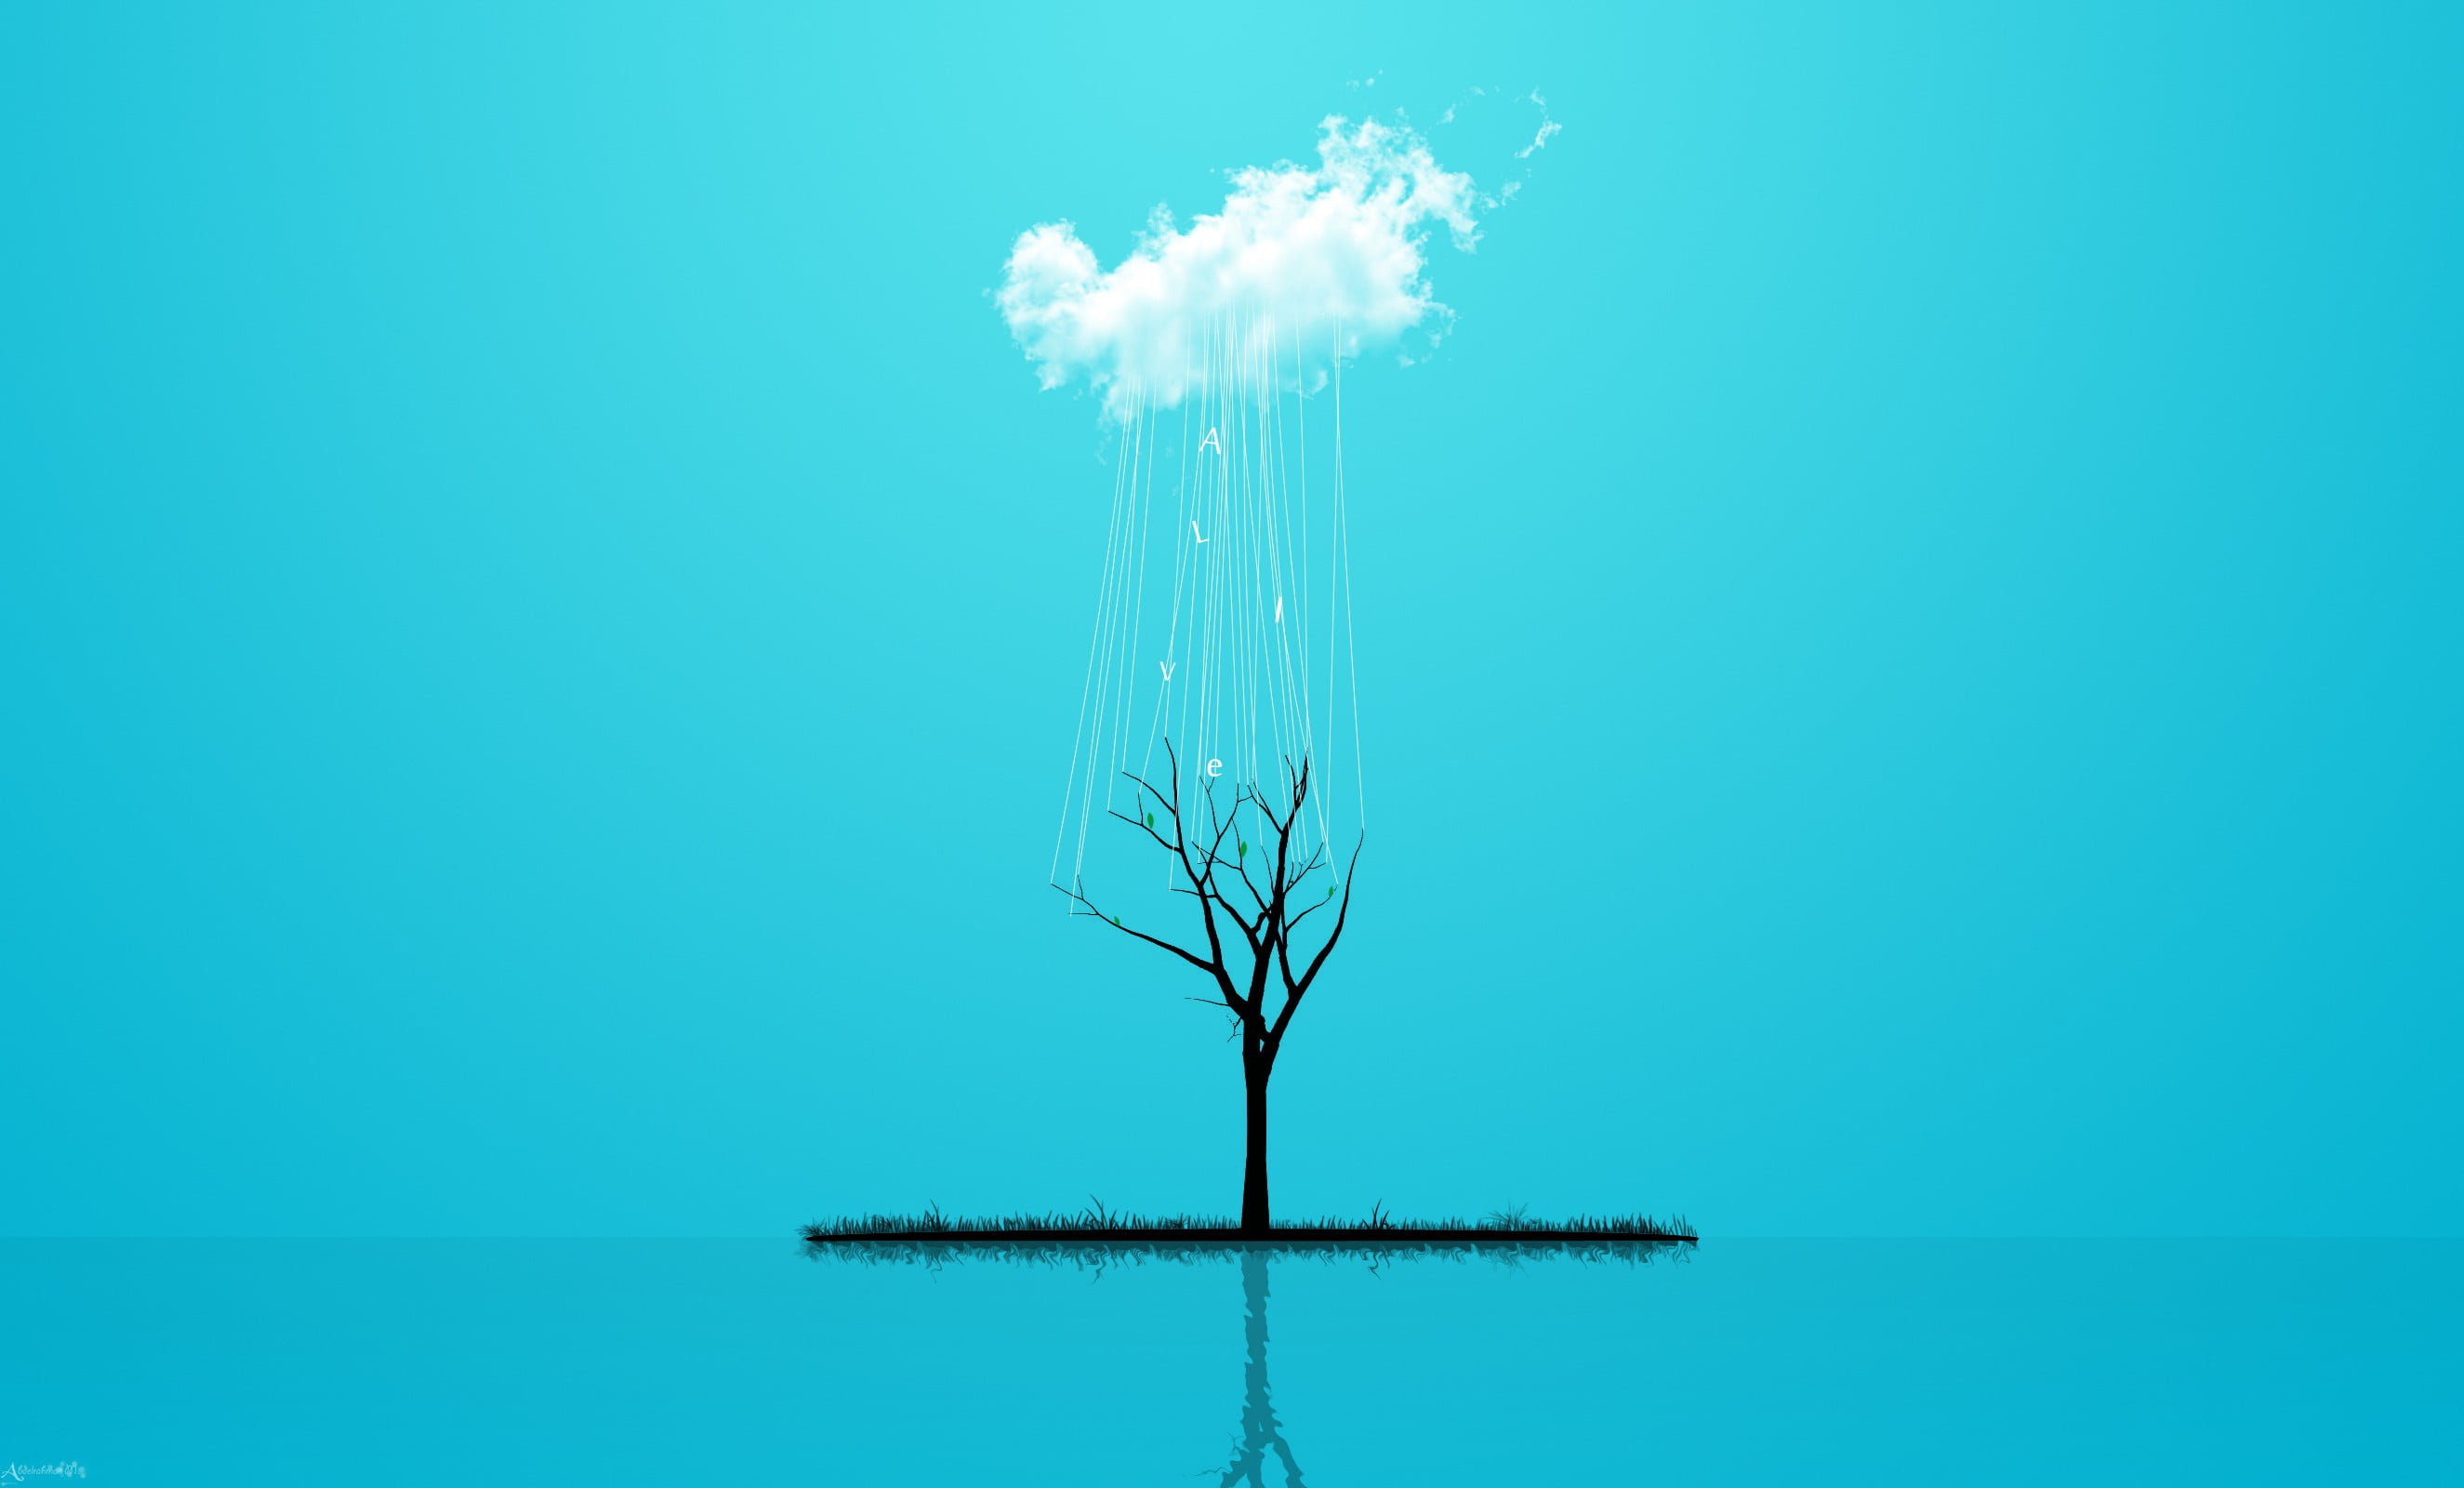 silhouette of bare tree illustration, clouds, trees, digital art, blue background